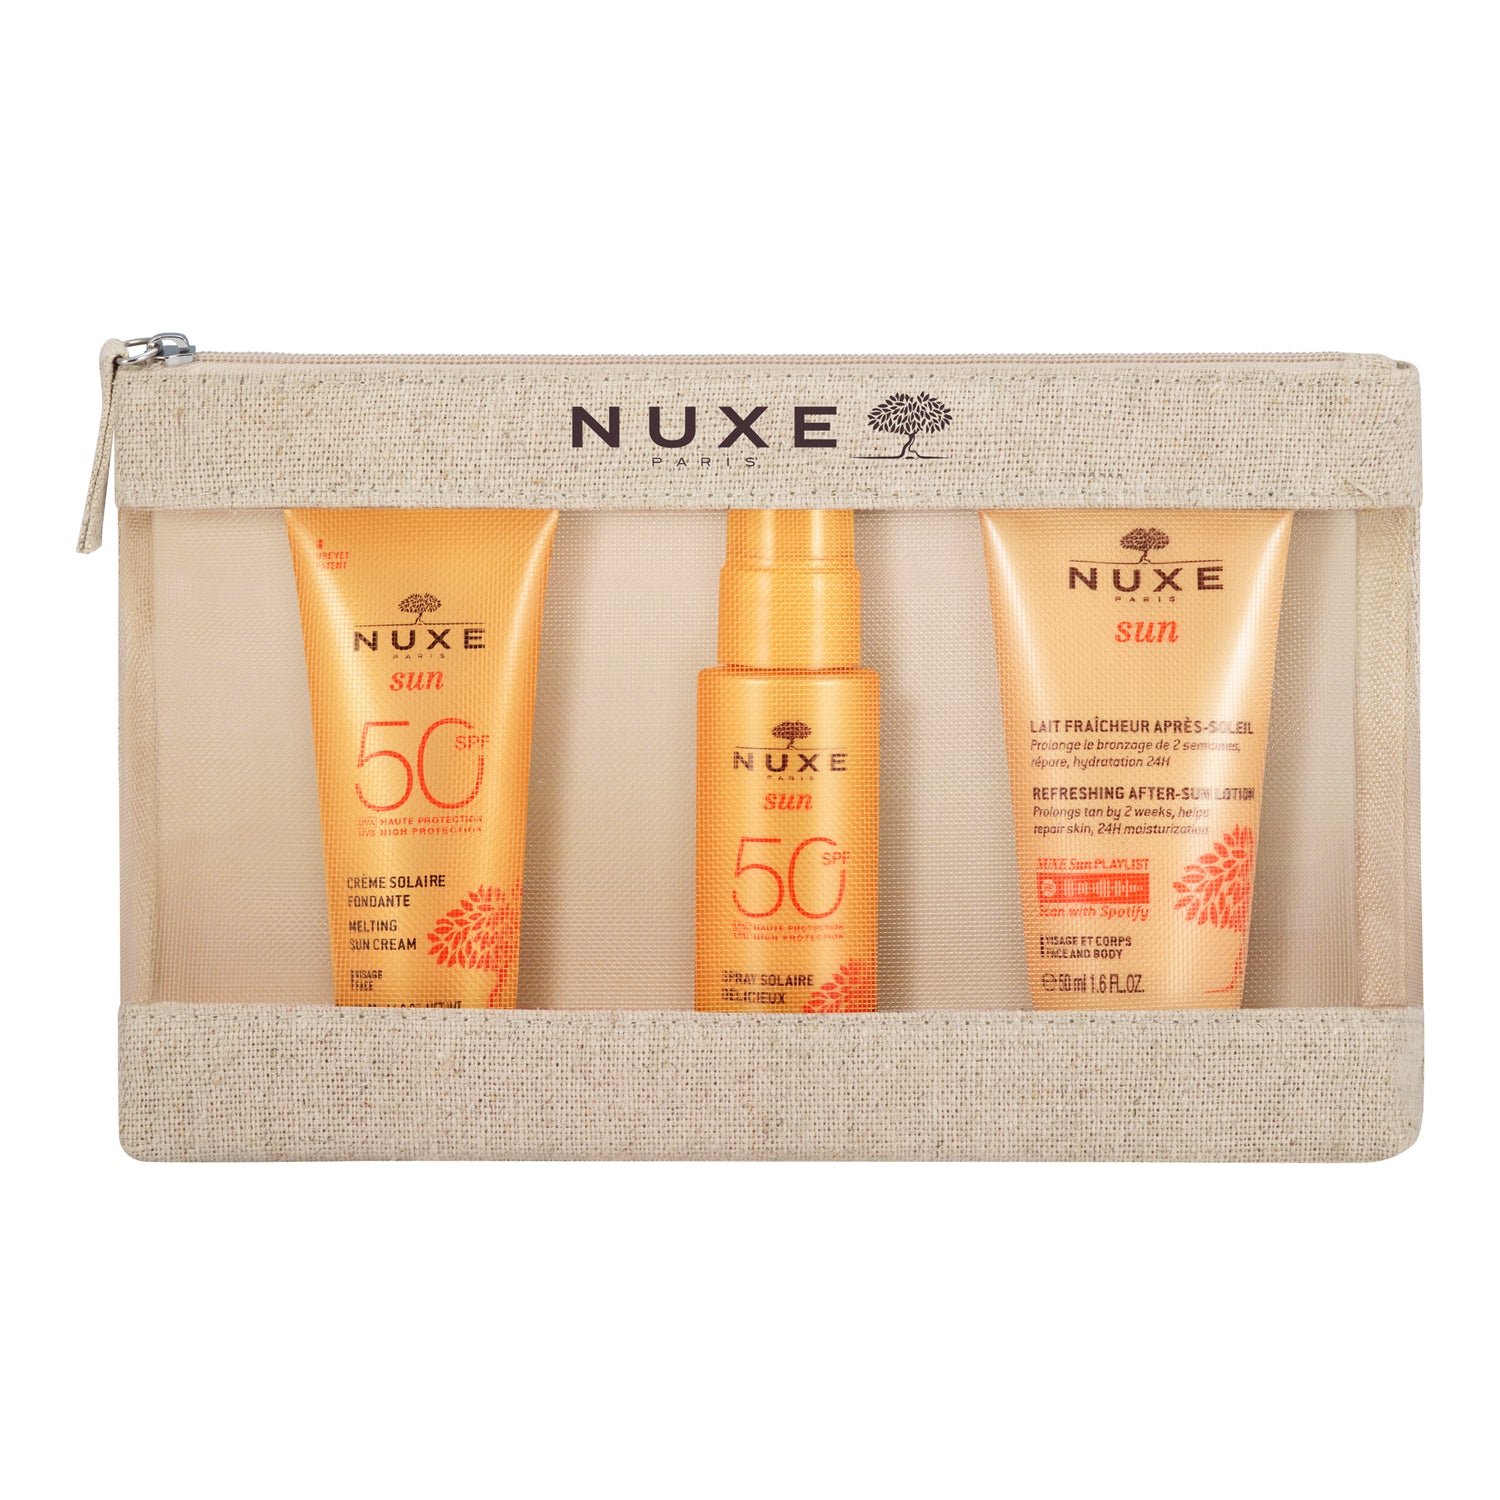 Nuxe Travel Kit "The Essentials of High Protection